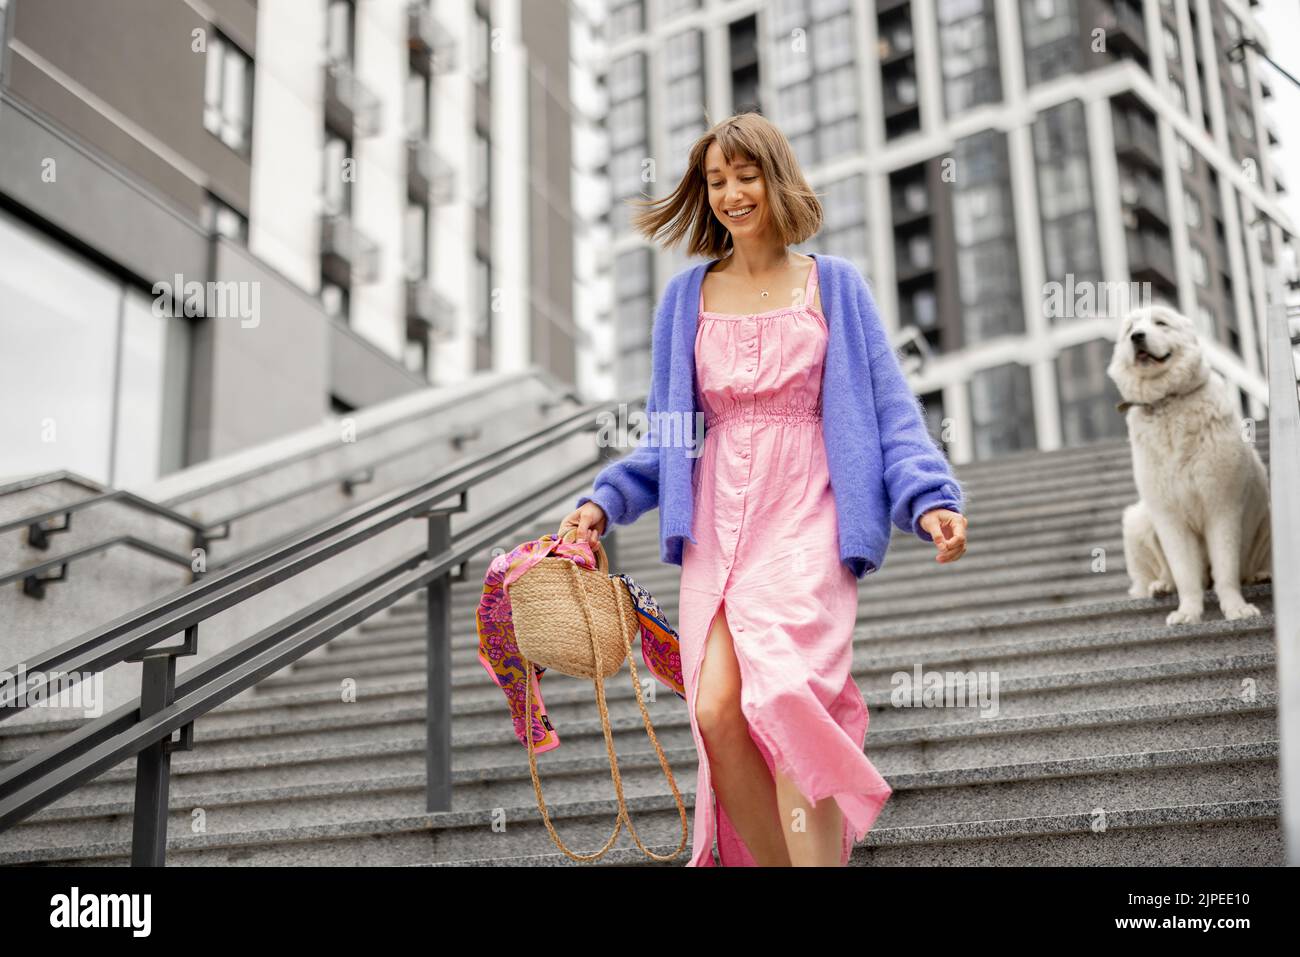 Young stylish woman dressed brightly runs down on staircase at modern residential area. Dog behind. Concept of style and carefree lifestyle Stock Photo